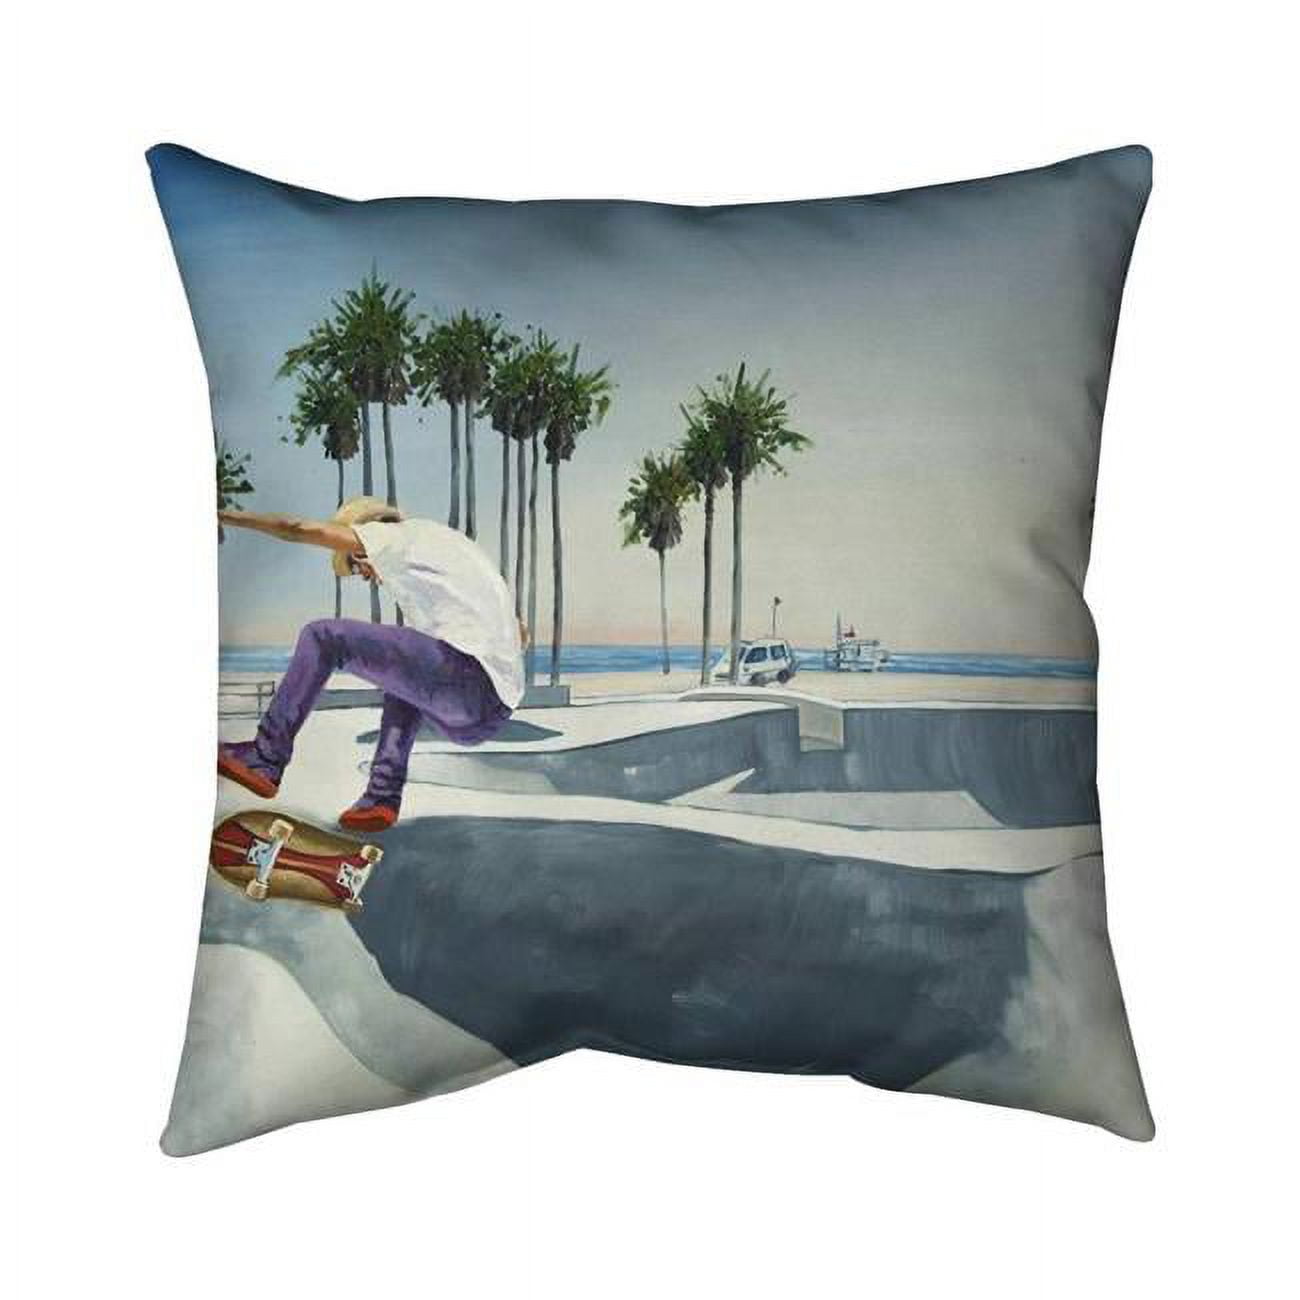 Fondo 18 x 18 in. Skate Park California-Double Sided Print Indoor Pillow